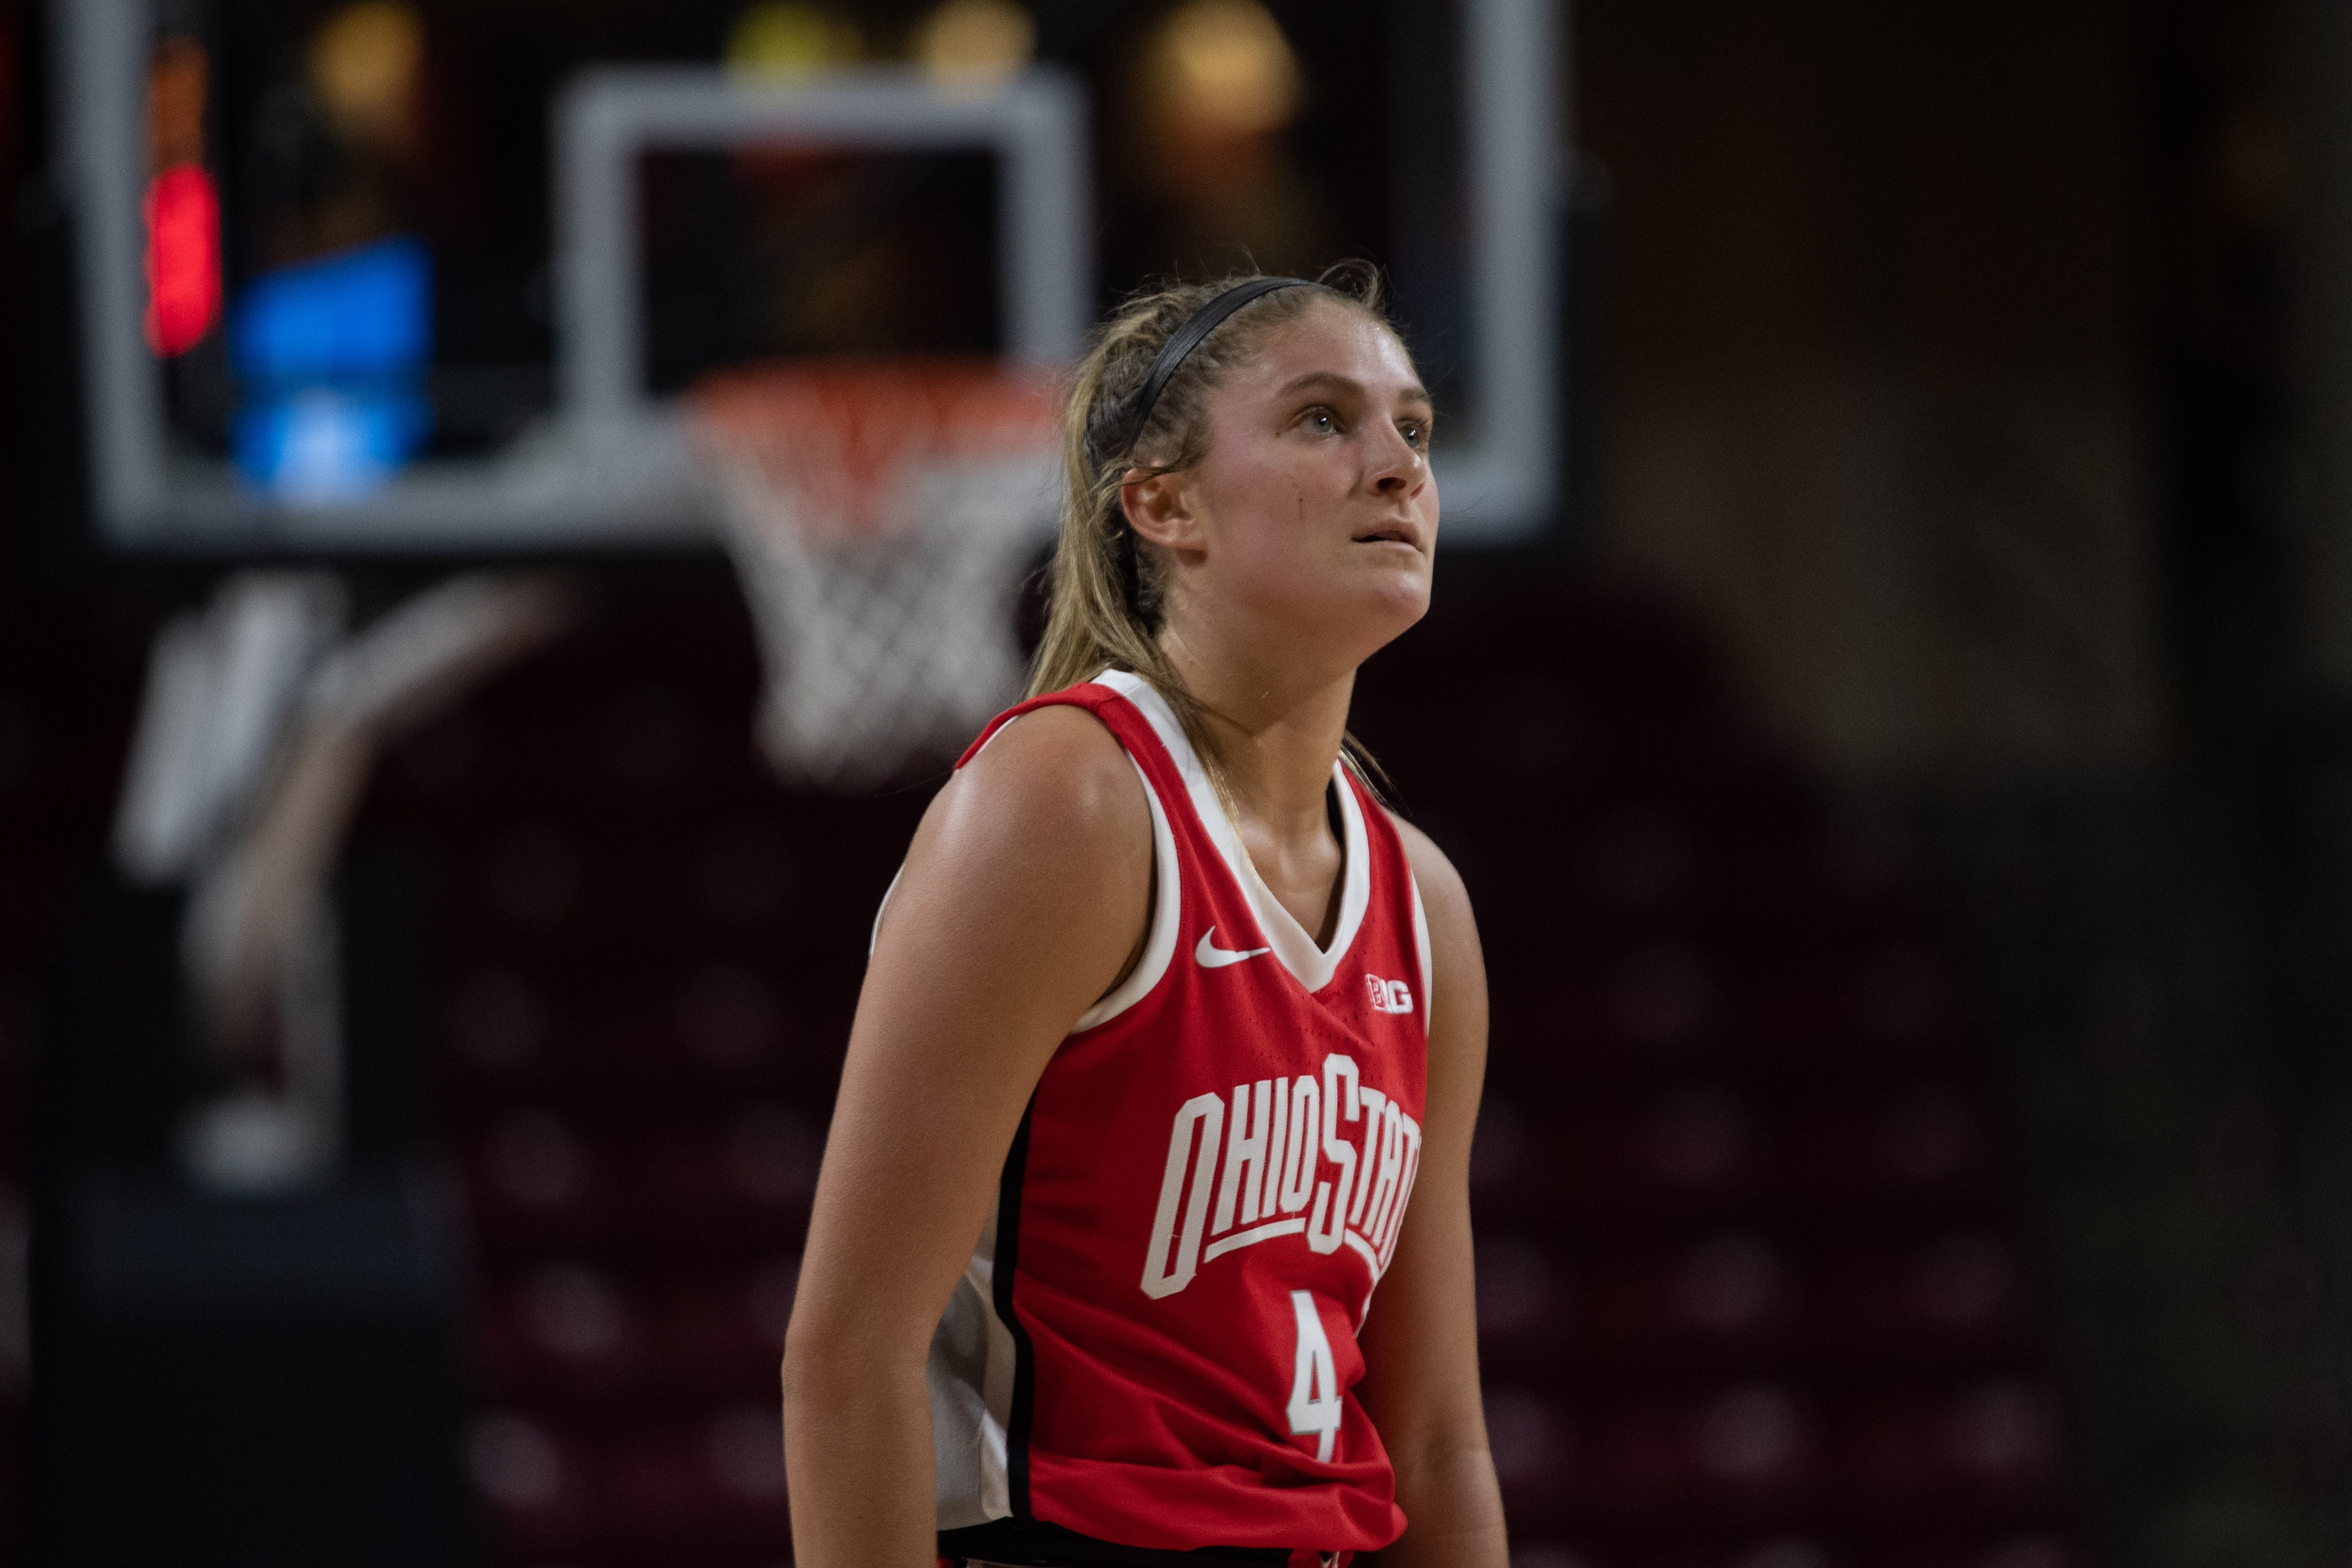 Ohio State Buckeyes guard Jacy Sheldon (4) looks on during a women's college basketball game between the Ohio State Buckeyes and the Boston College Eagles on November 13, 2022, at Conte Forum in Chestnut Hill, MA.